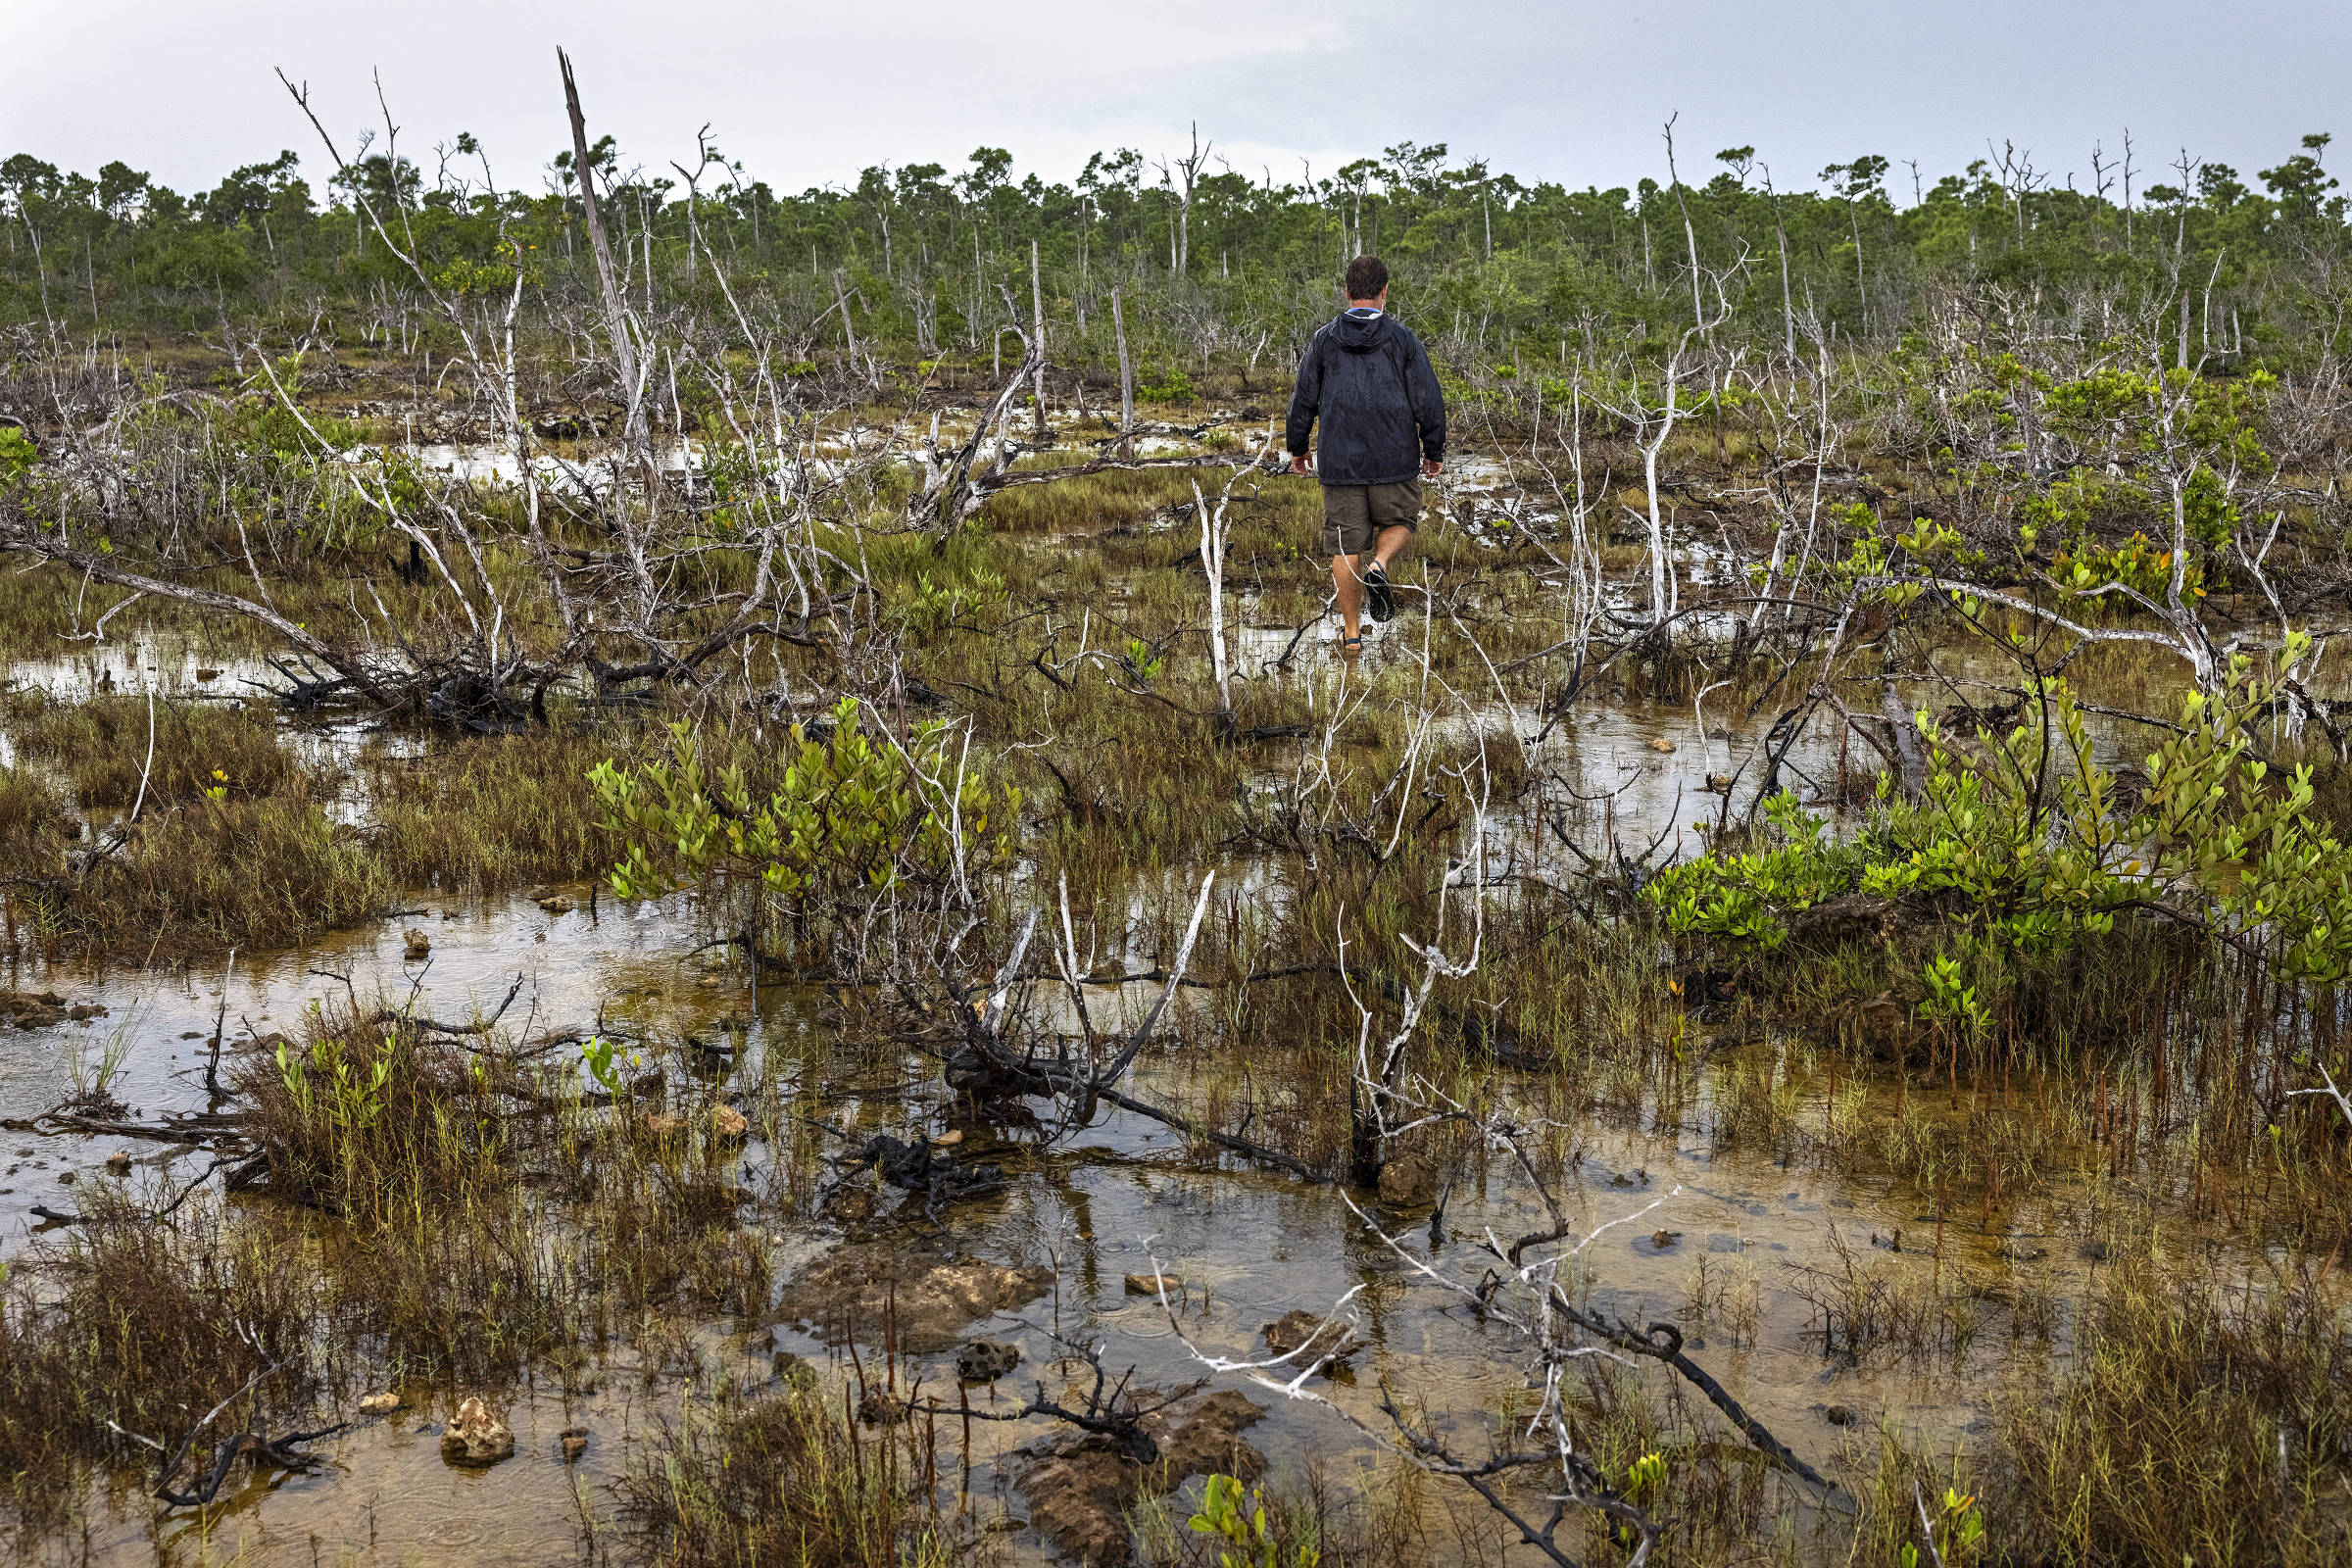 Chris Bergh, member of the NGO The Nature Conservancy, walks in an area of dead vegetation in Big Pine Key, Florida